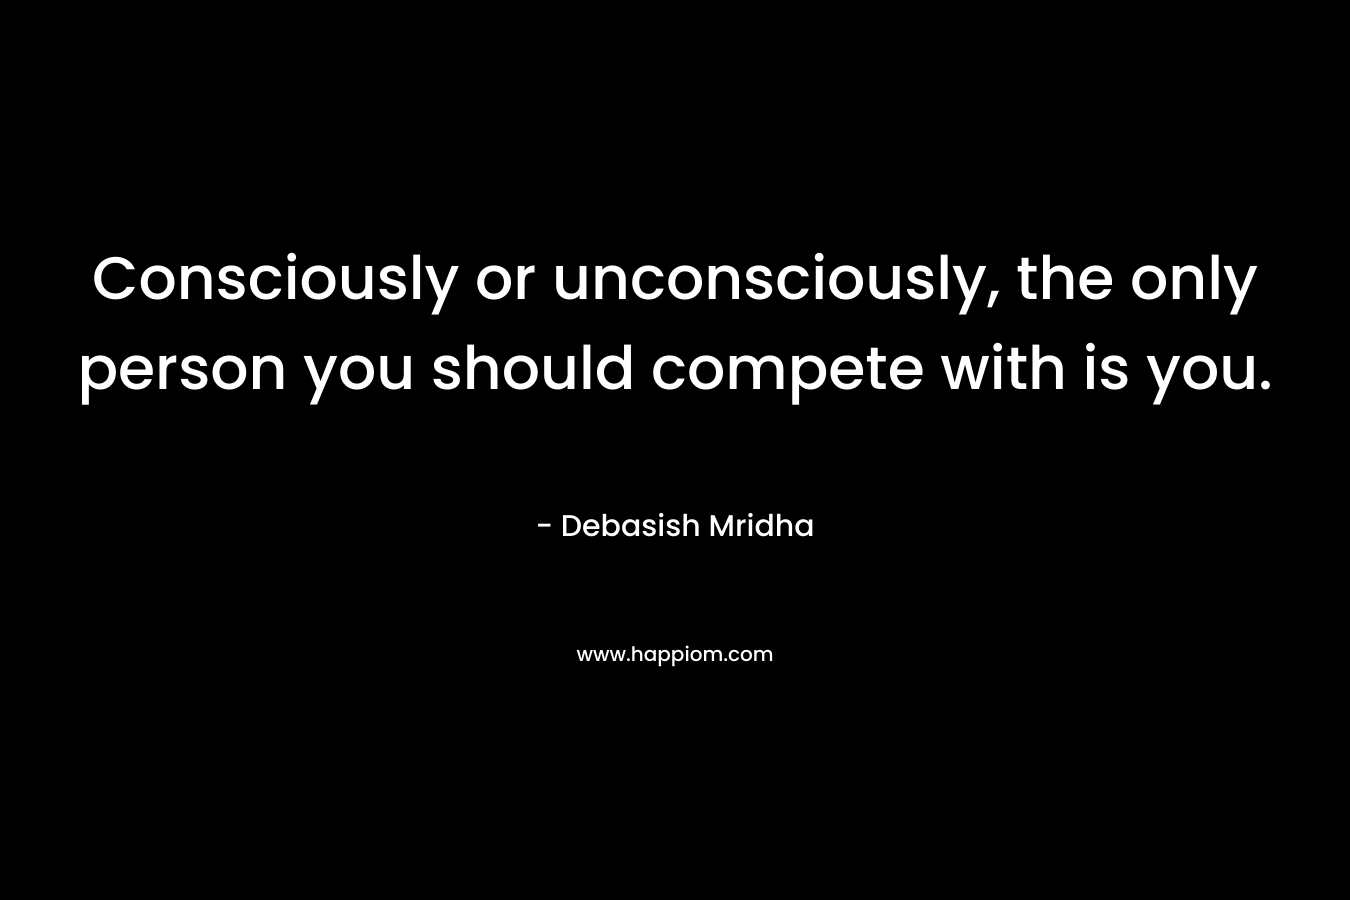 Consciously or unconsciously, the only person you should compete with is you.